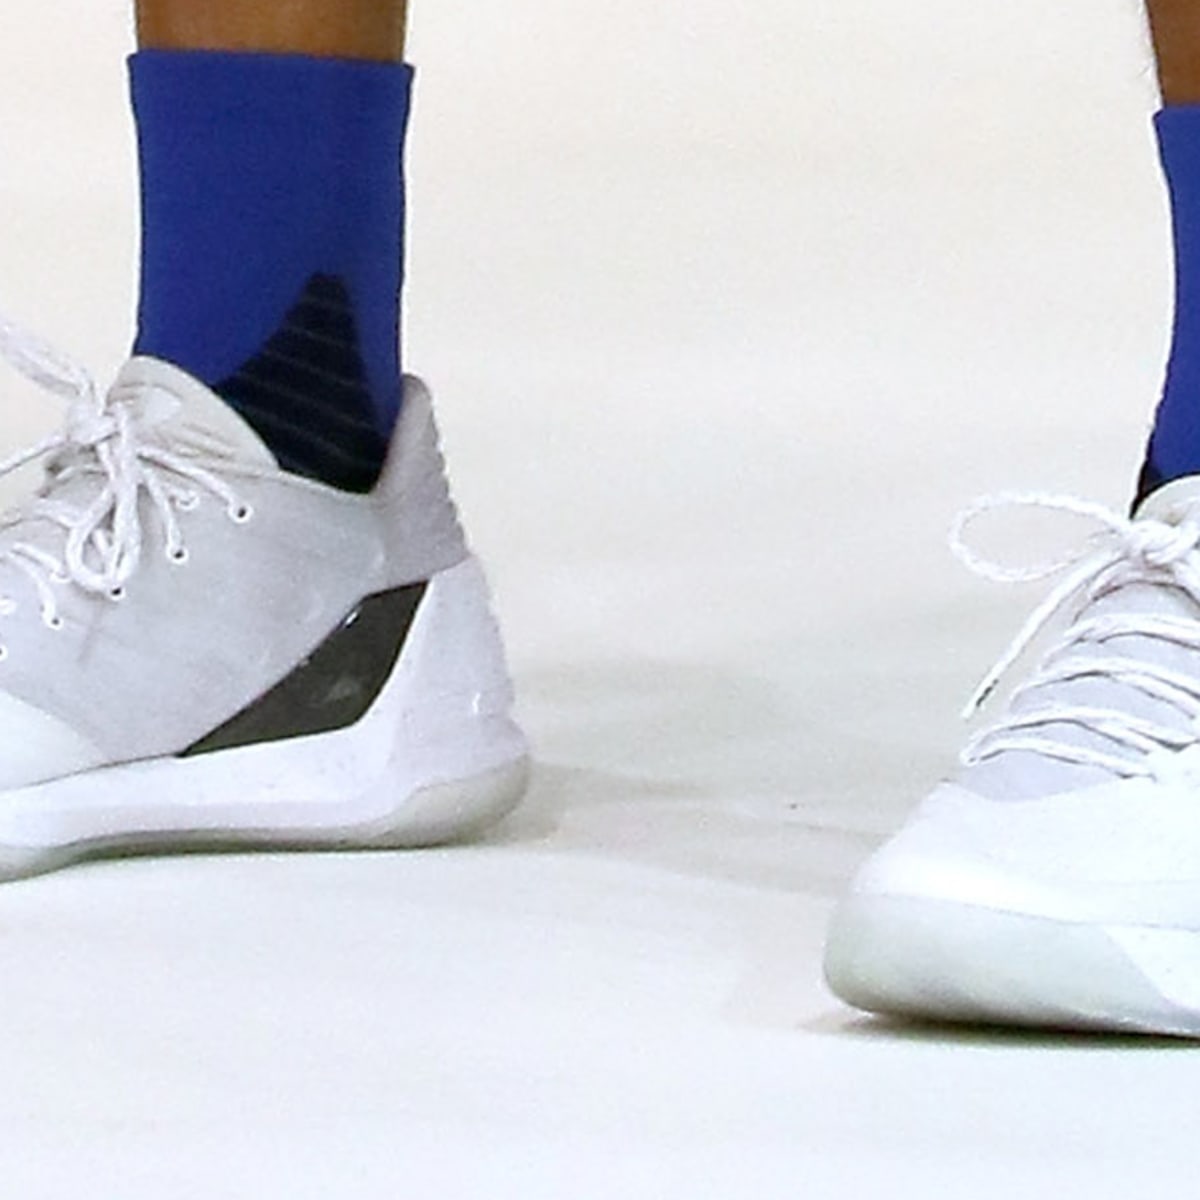 Stephen Curry: Chef Curry 3 UnderArmour sneakers debut - SI Kids: Sports  News for Kids, Kids Games and More